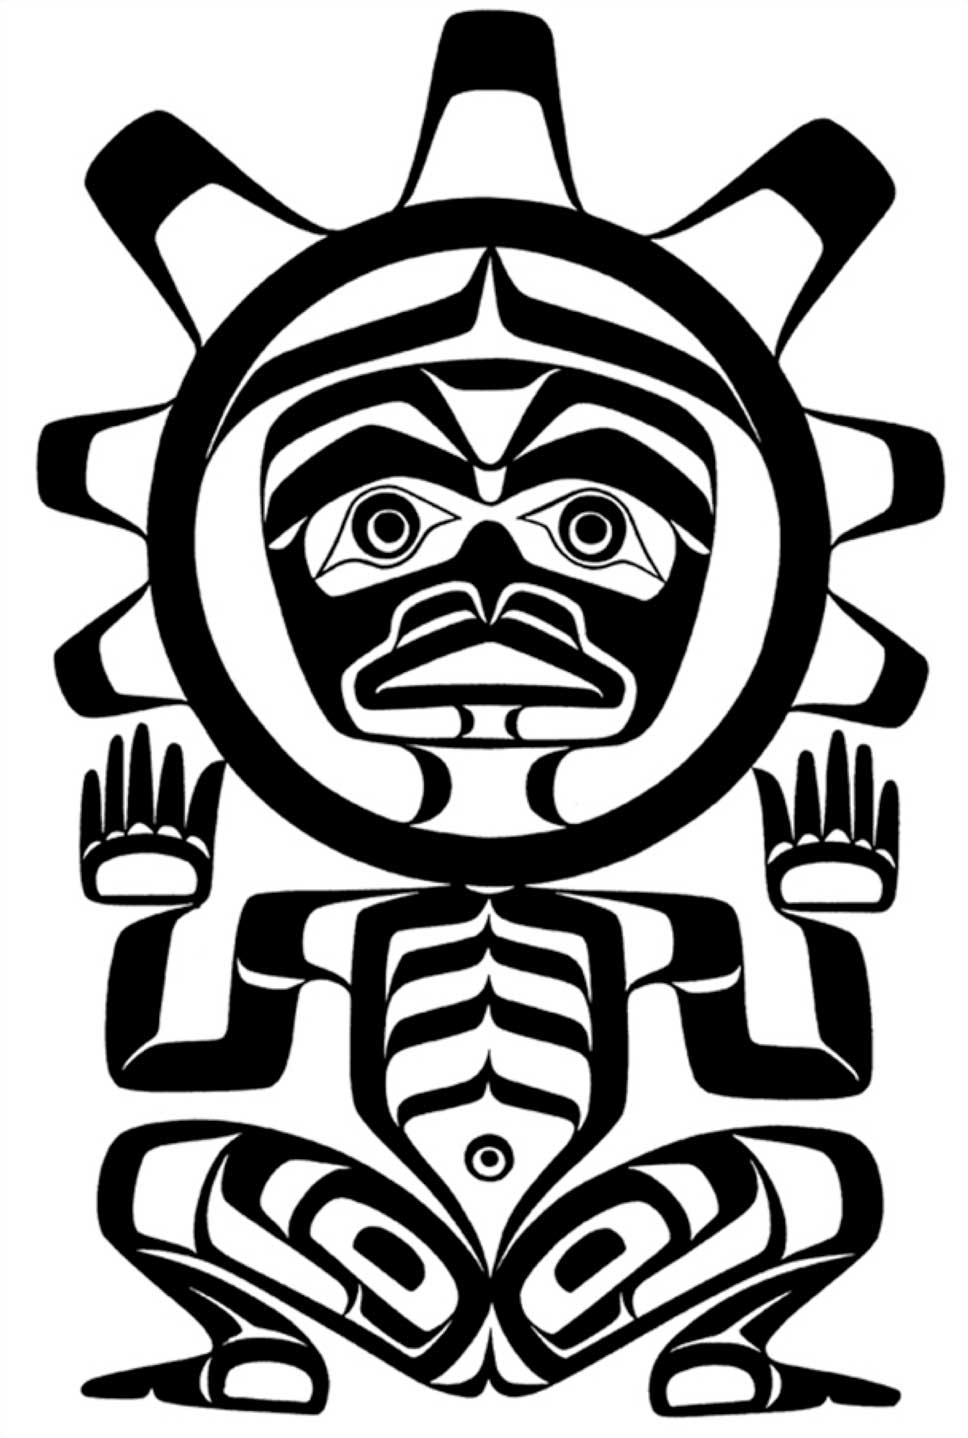 Black line drawing shows the U'Mista Cultural Society logo as the sun in human form